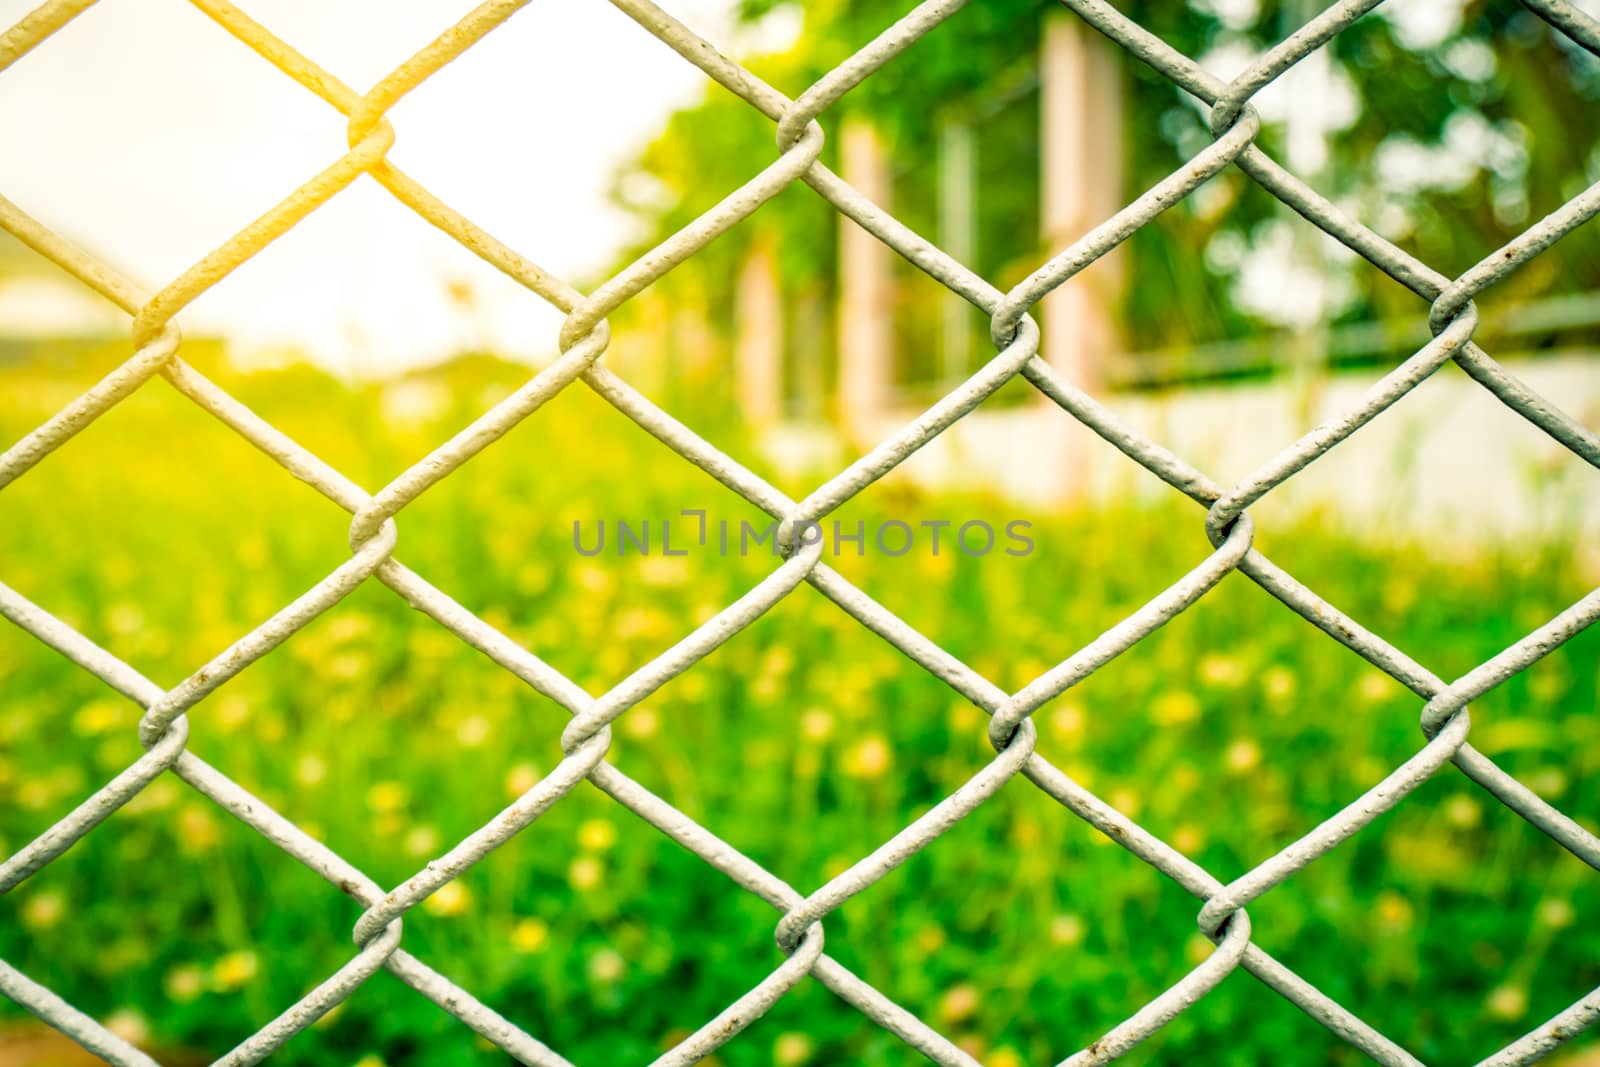 The fence mesh netting on blurred yellow flower field as the background with flare light. Green grass field.